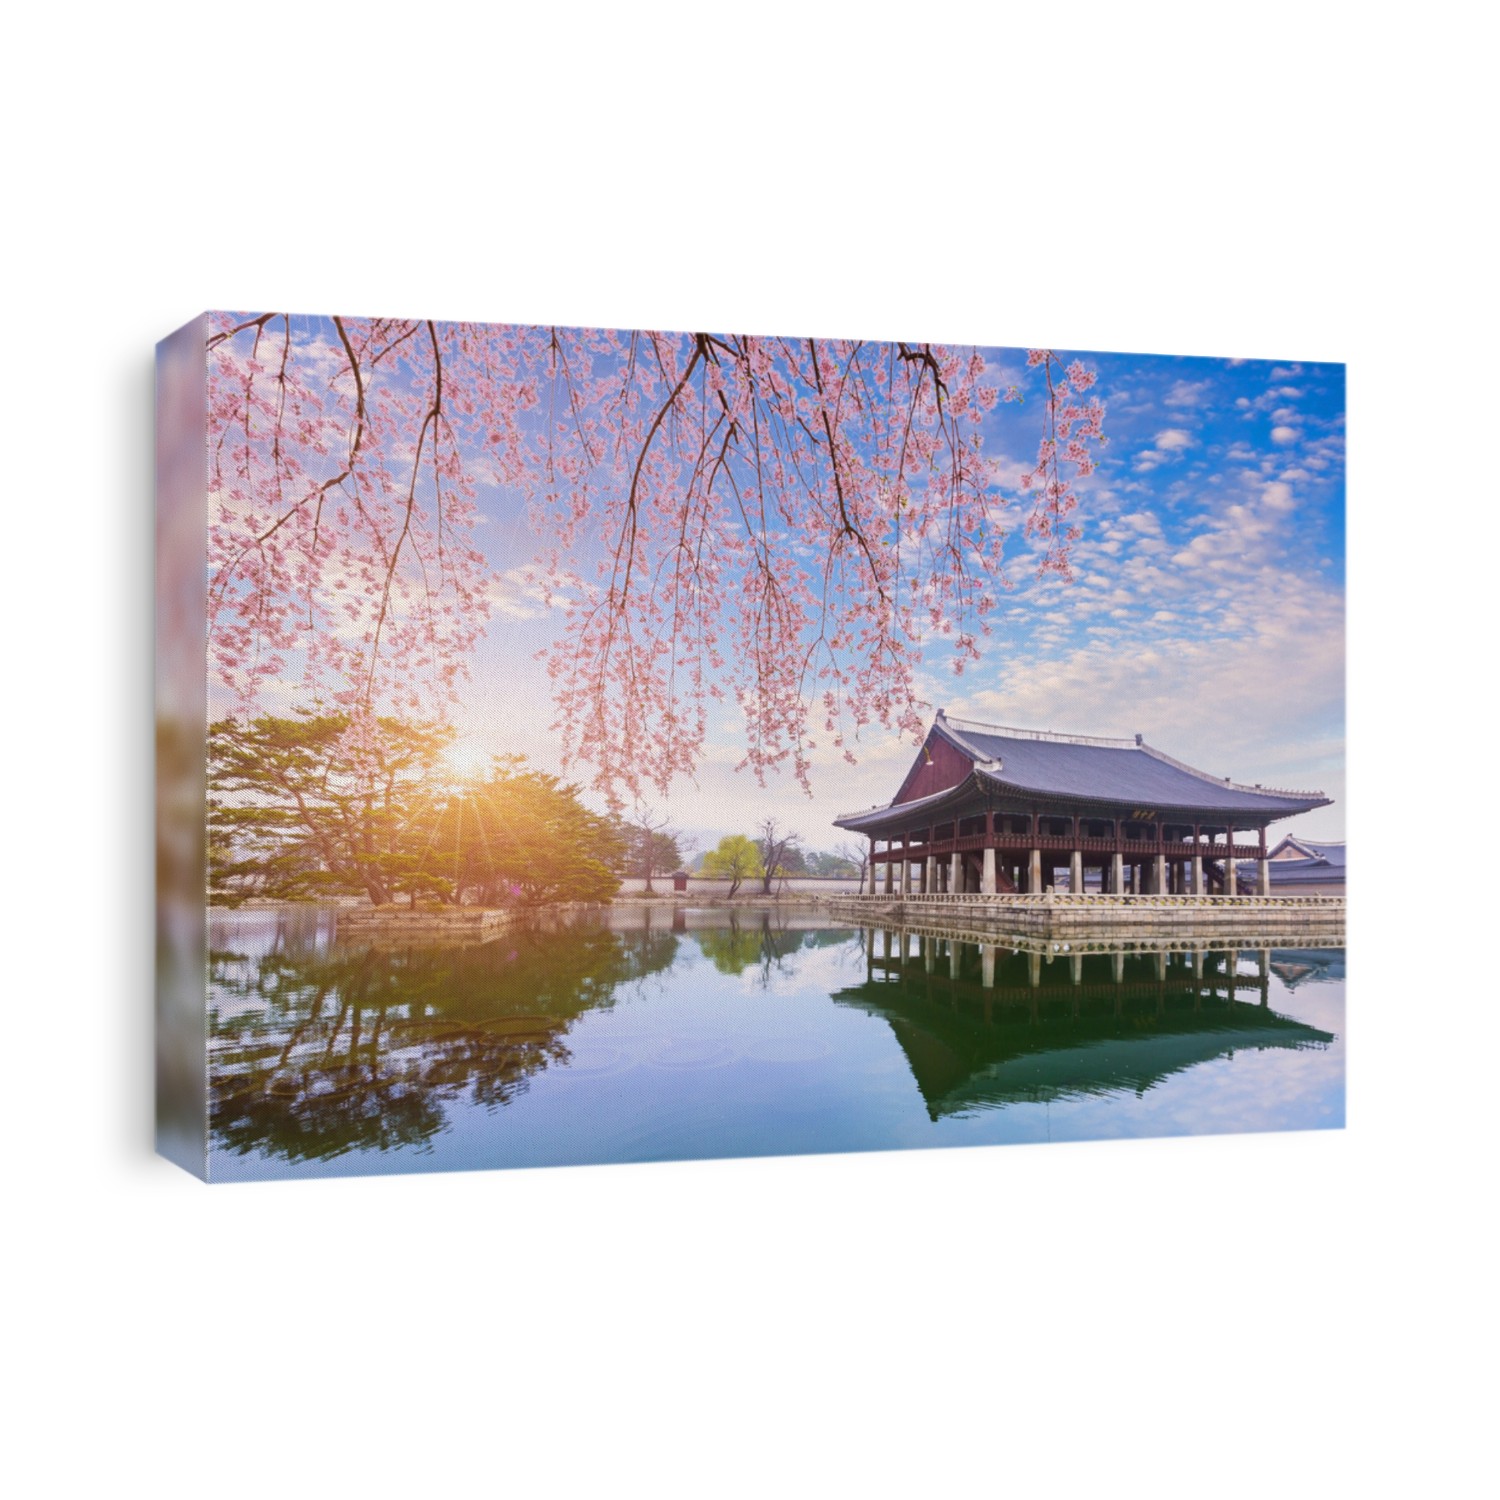 gyeongbokgung palace with cherry blossom tree in spring time in seoul city of korea, south korea.